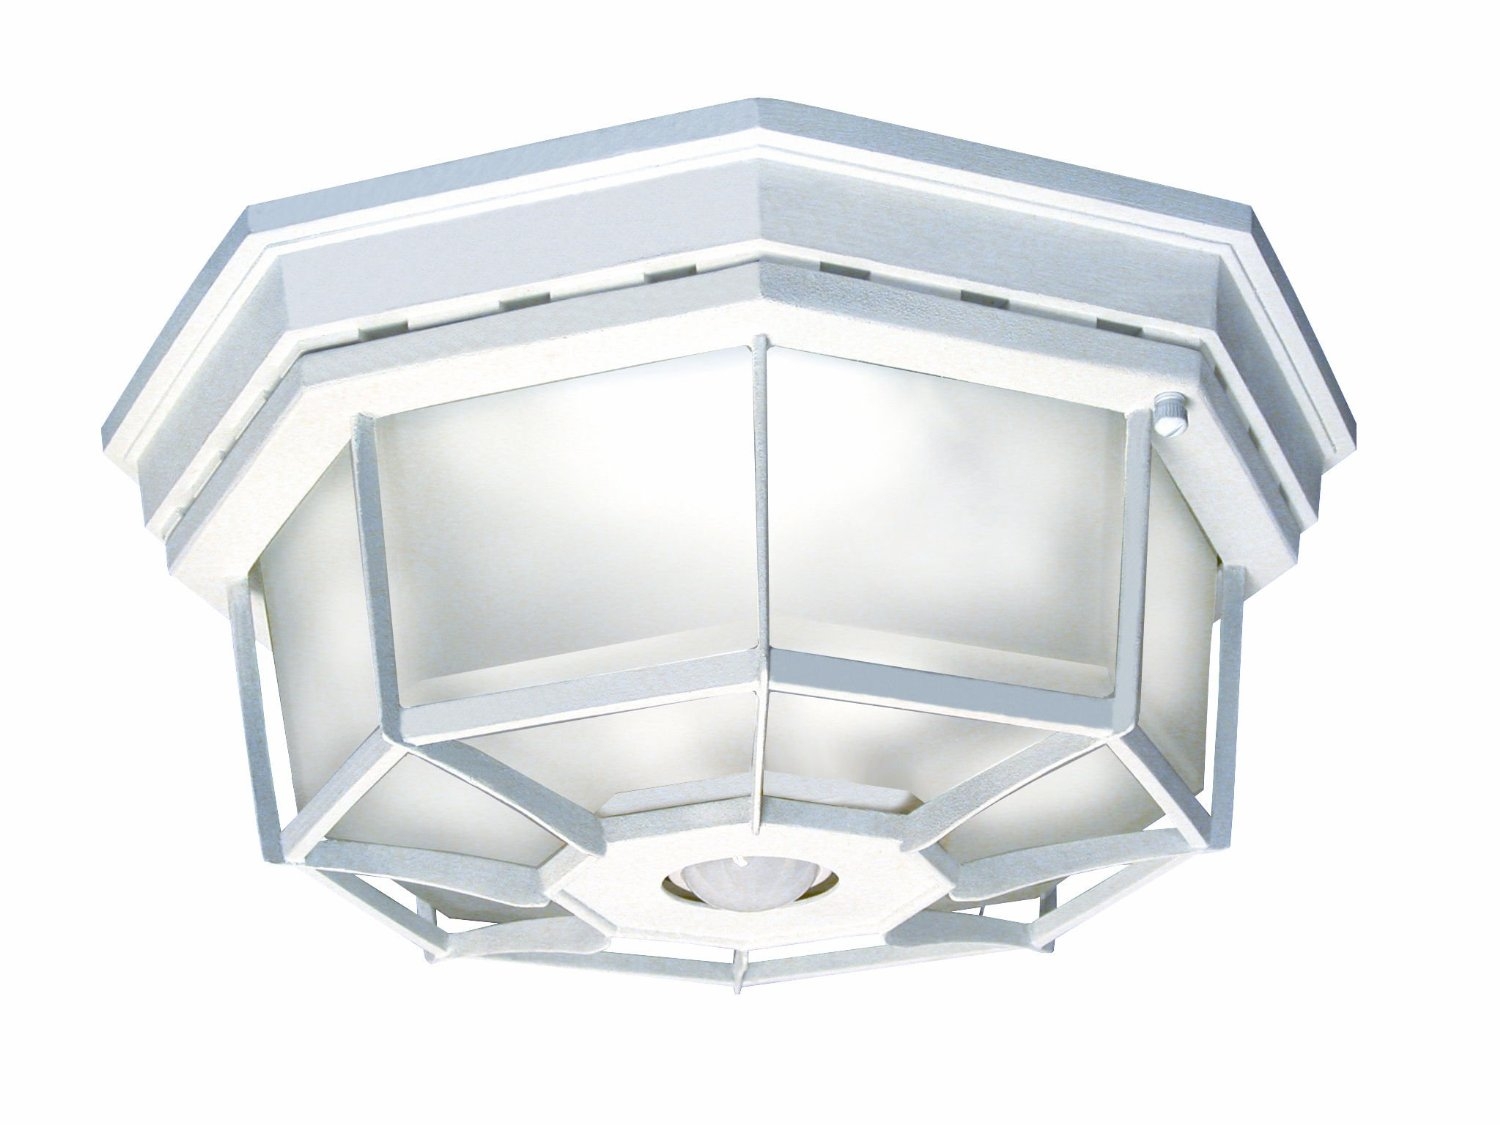 Motion Activated Ceiling Light Fixture